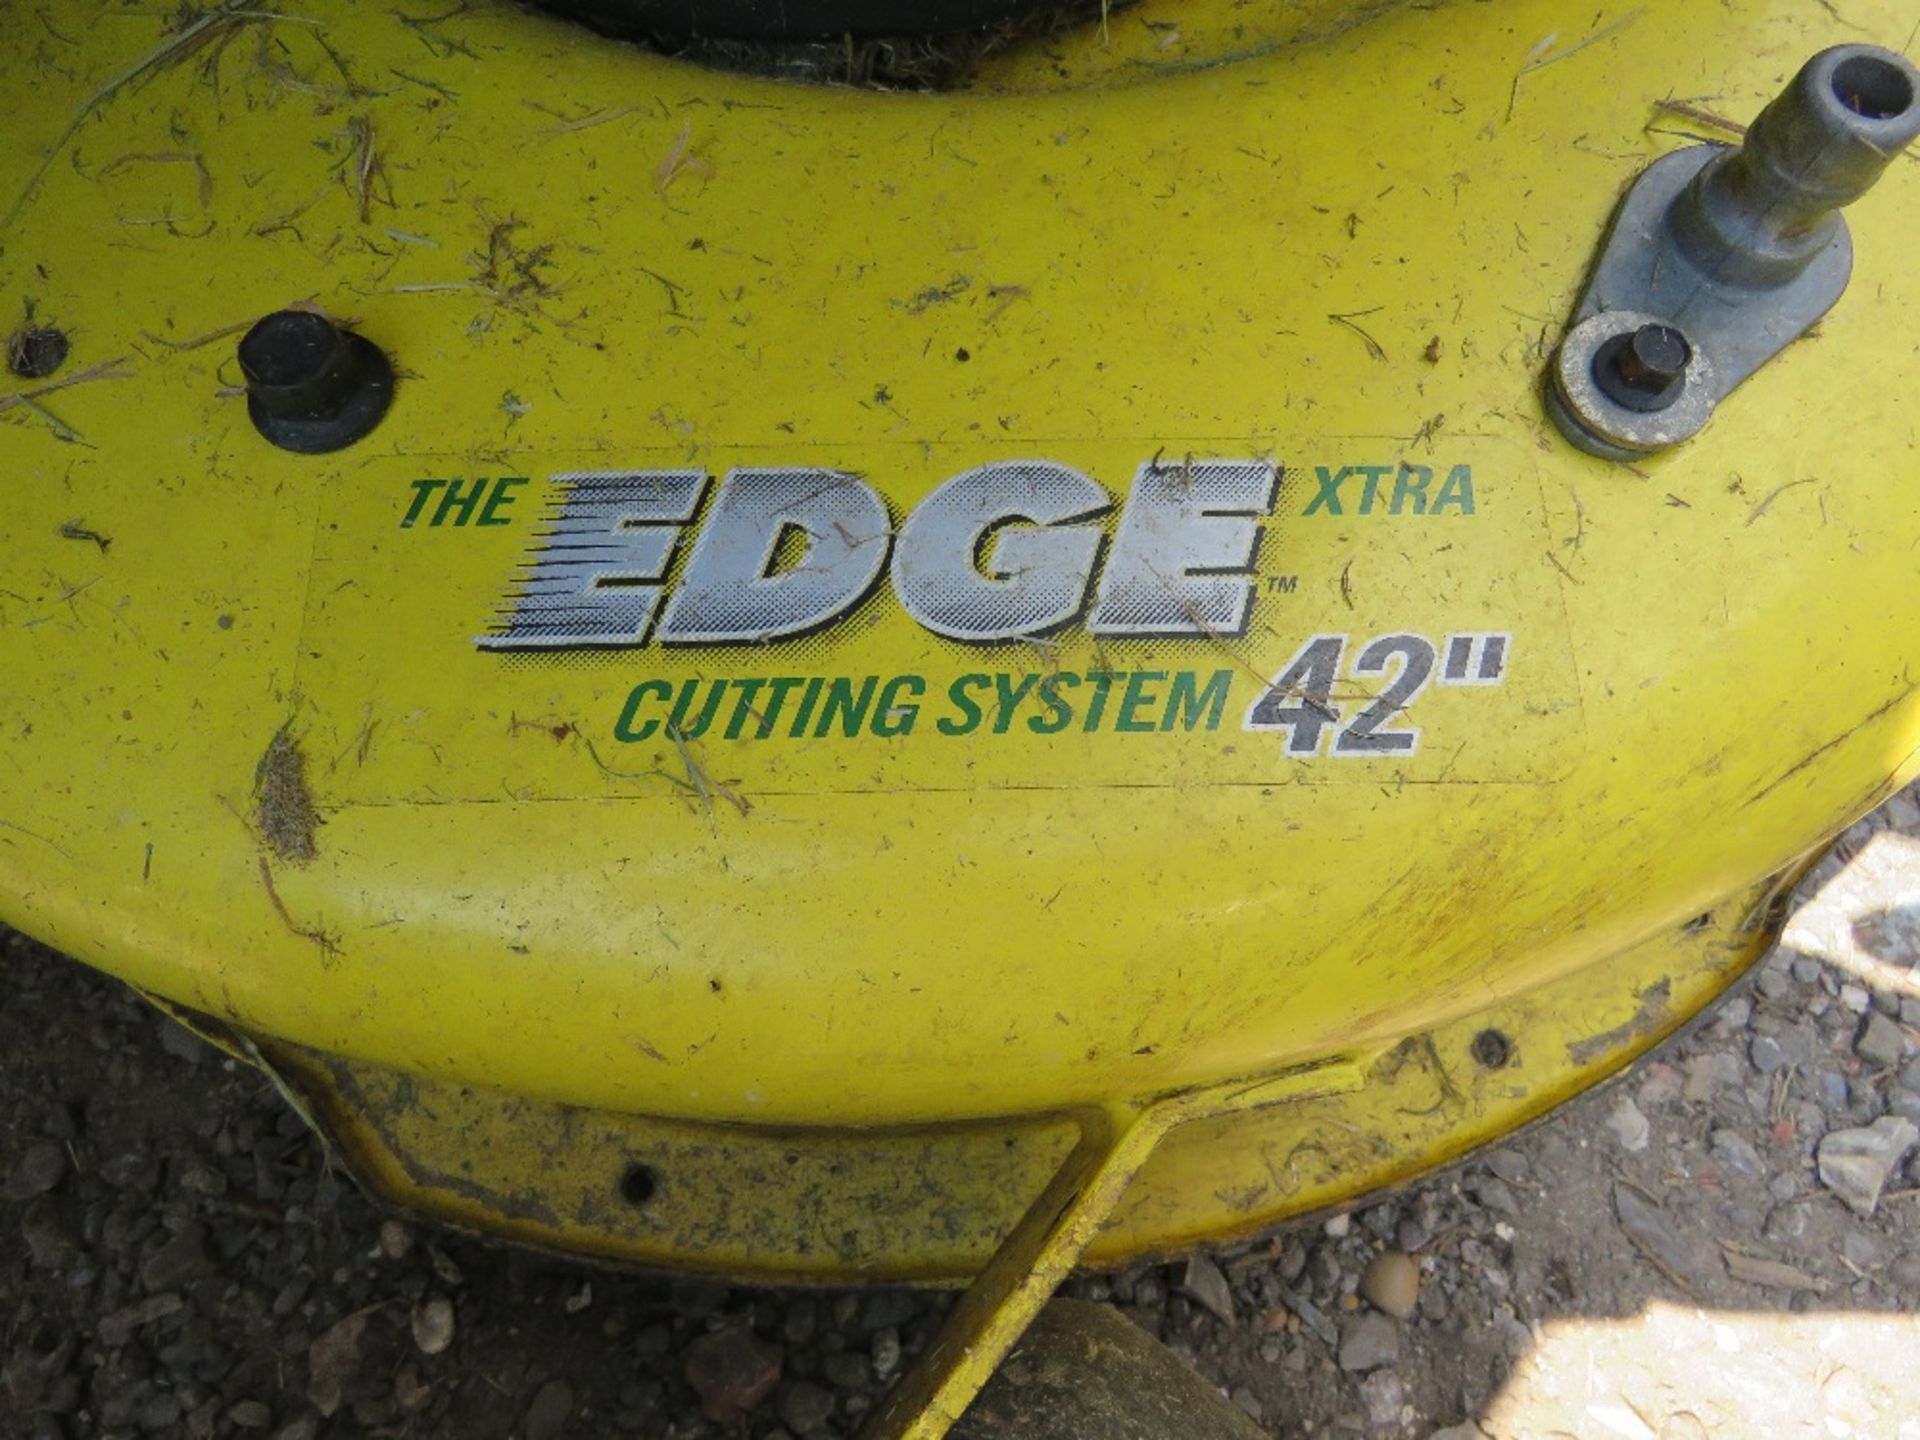 JOHN DEERE X320 PETROL RIDE ON MOWER, 756 REC HOURS. RUNS AND DRIVES BUT MOWERS NOT ENGAGING...NO BE - Image 8 of 11